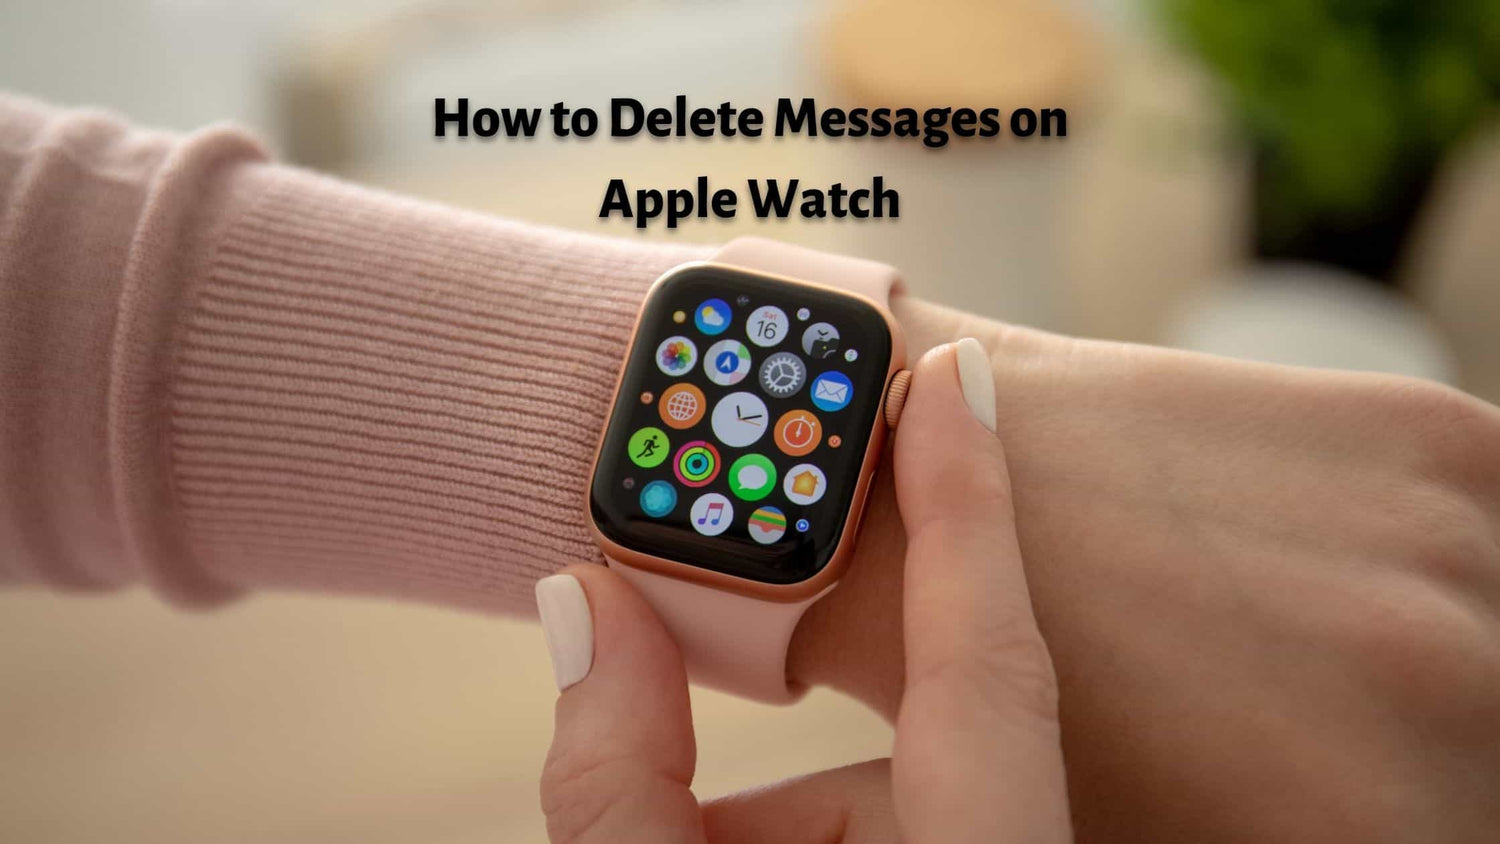 |Why you should delete messages on Apple Watch